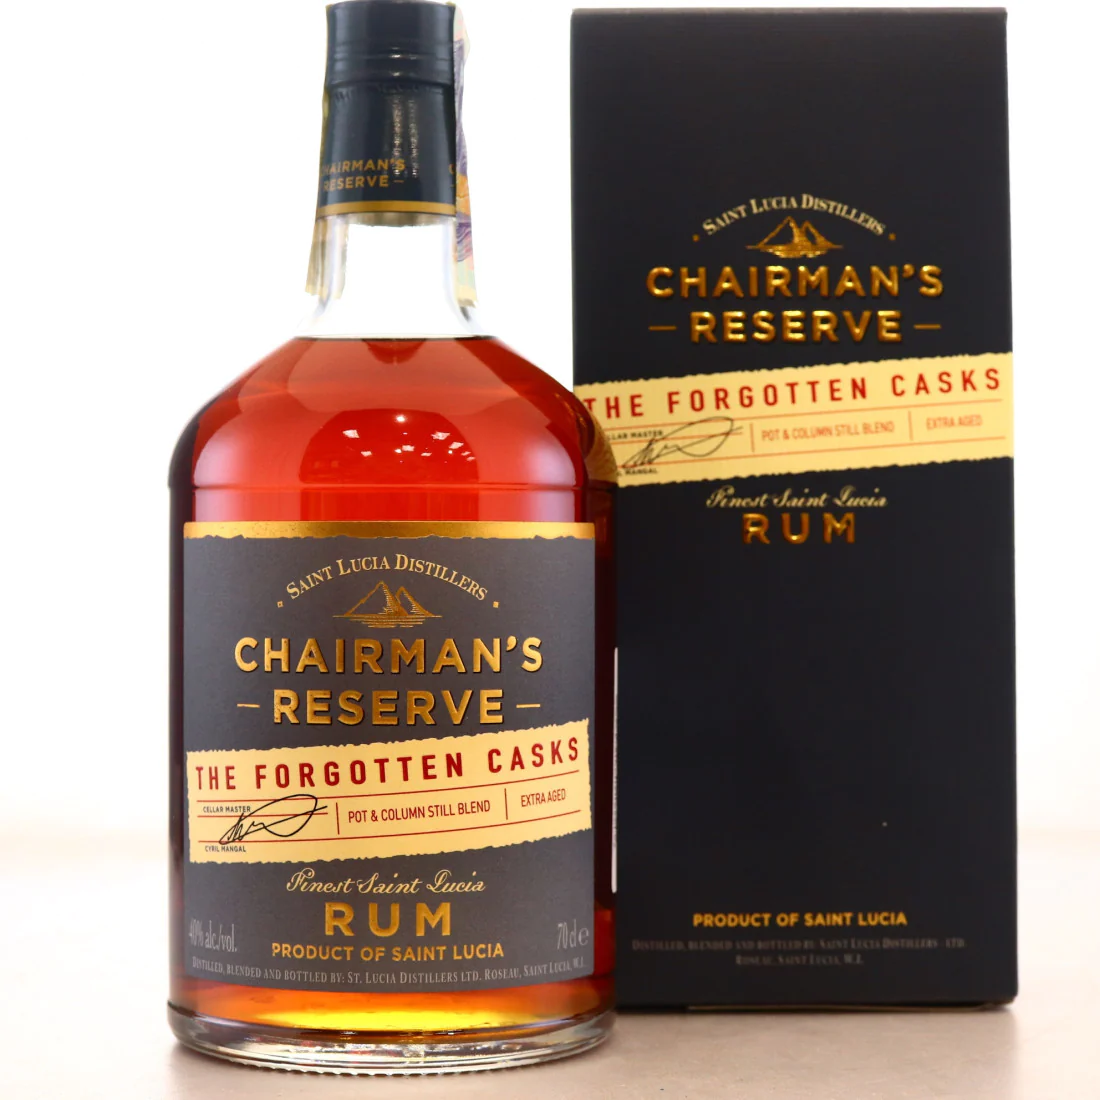 Chairman’s Reserve The Forgotten Cask Rum, St. Lucia